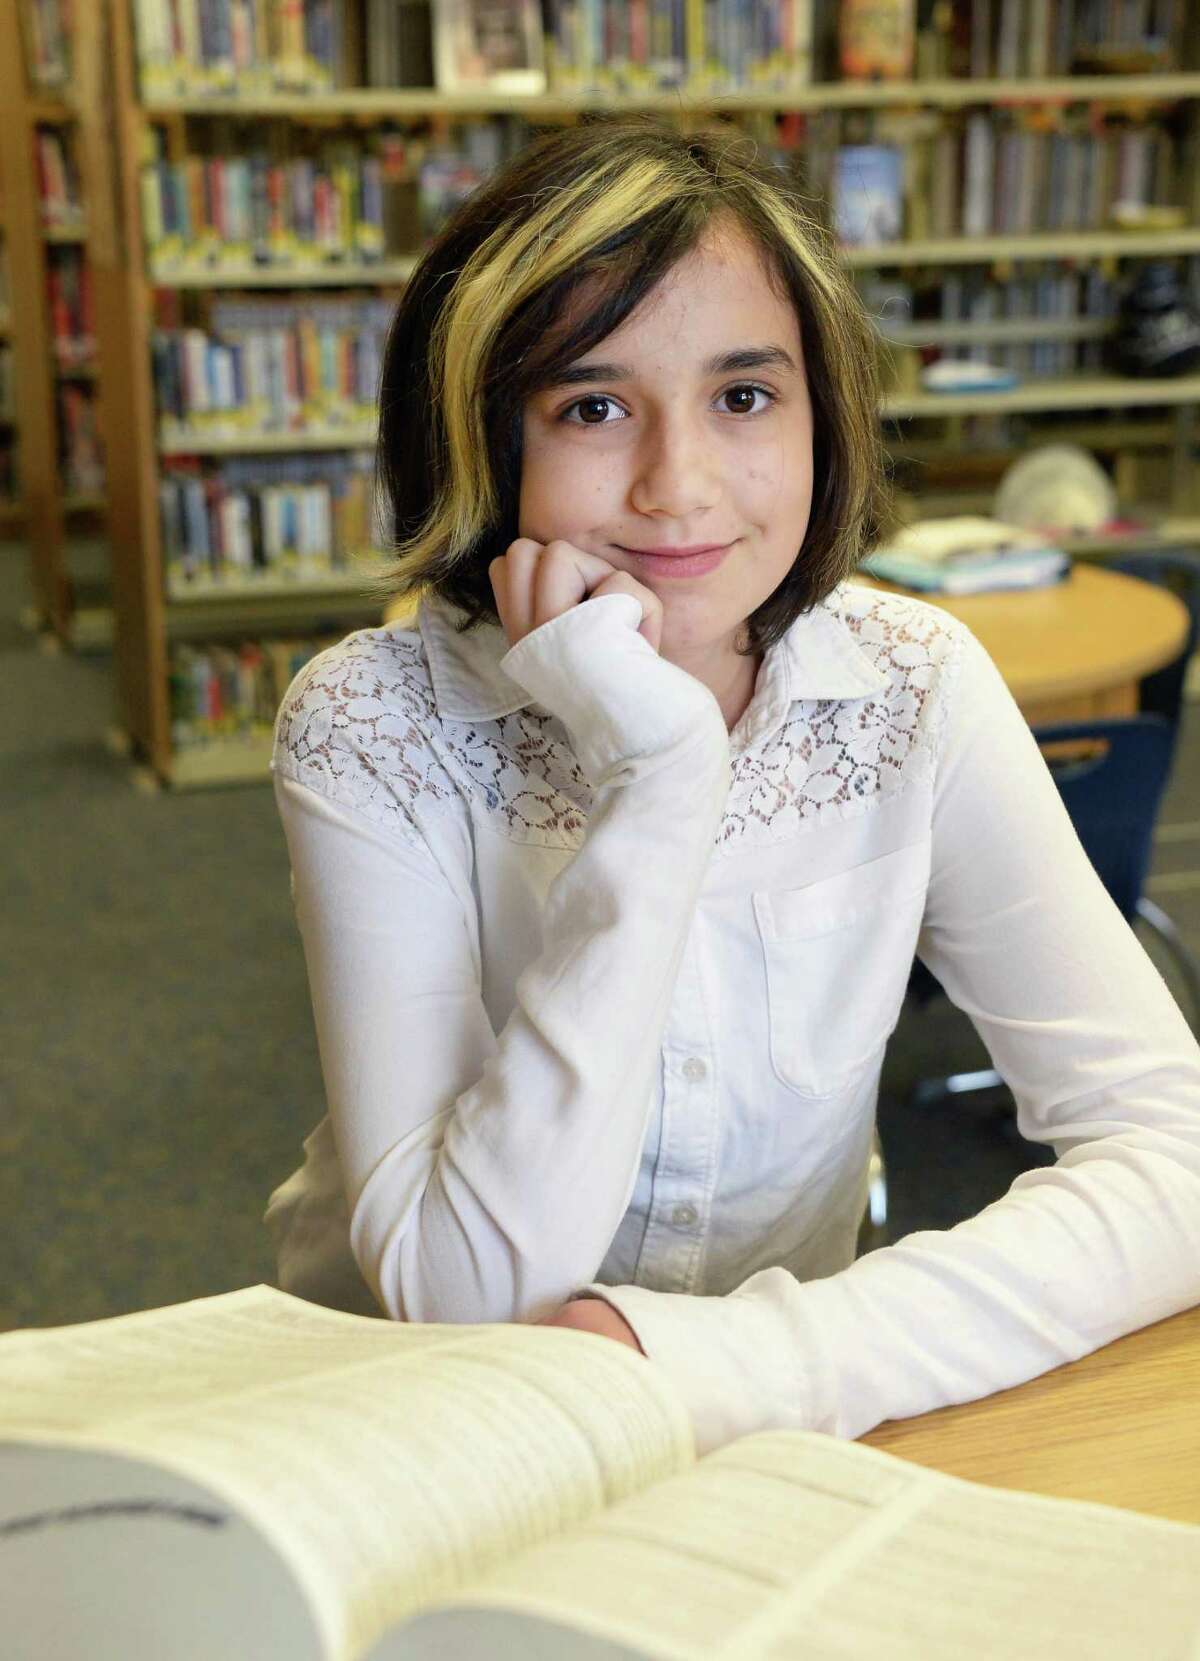 National spelling bee competitor Lydia Loverin, 13, in the library at New Lebanon Junior-Senior High School Friday April 24, 2015 in Ne w Lebanon, NY. (John Carl D'Annibale / Times Union)